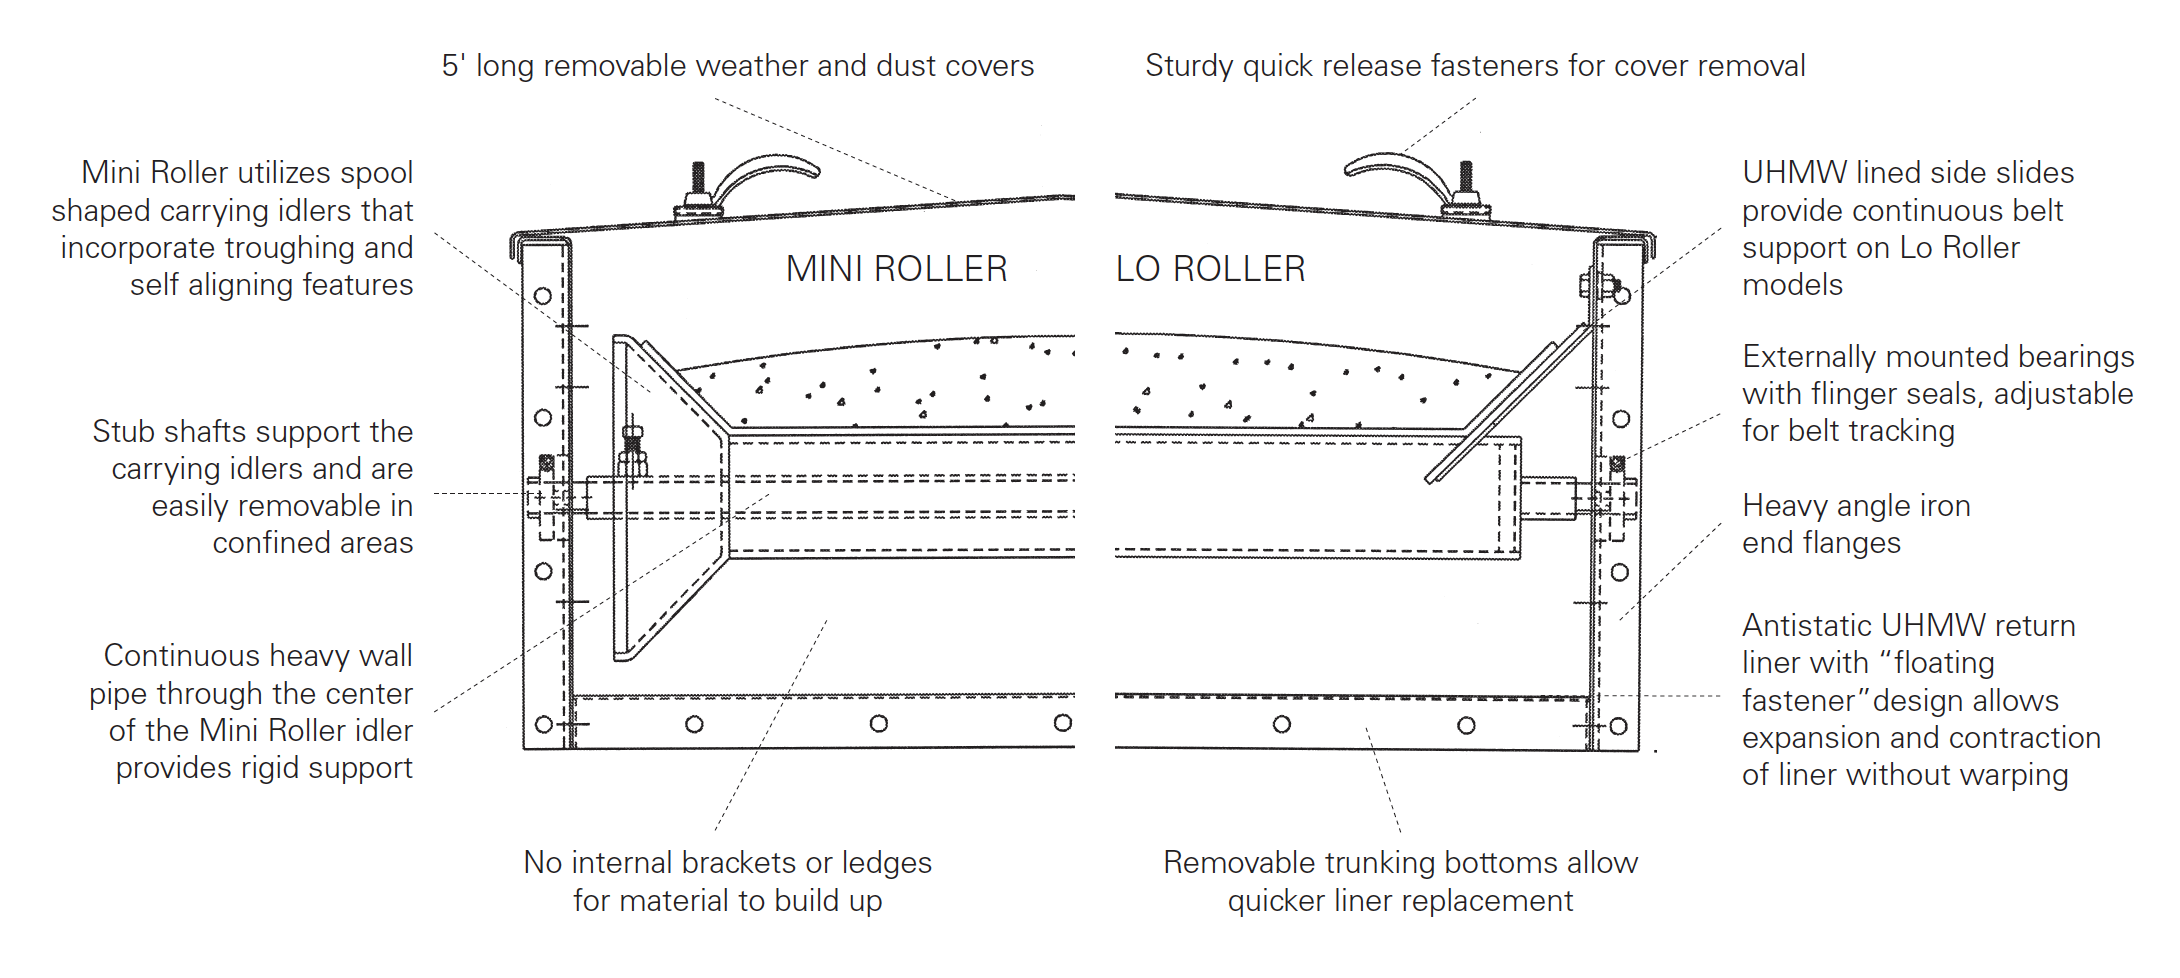 Mini Roller and Lo Roller Diagram.png